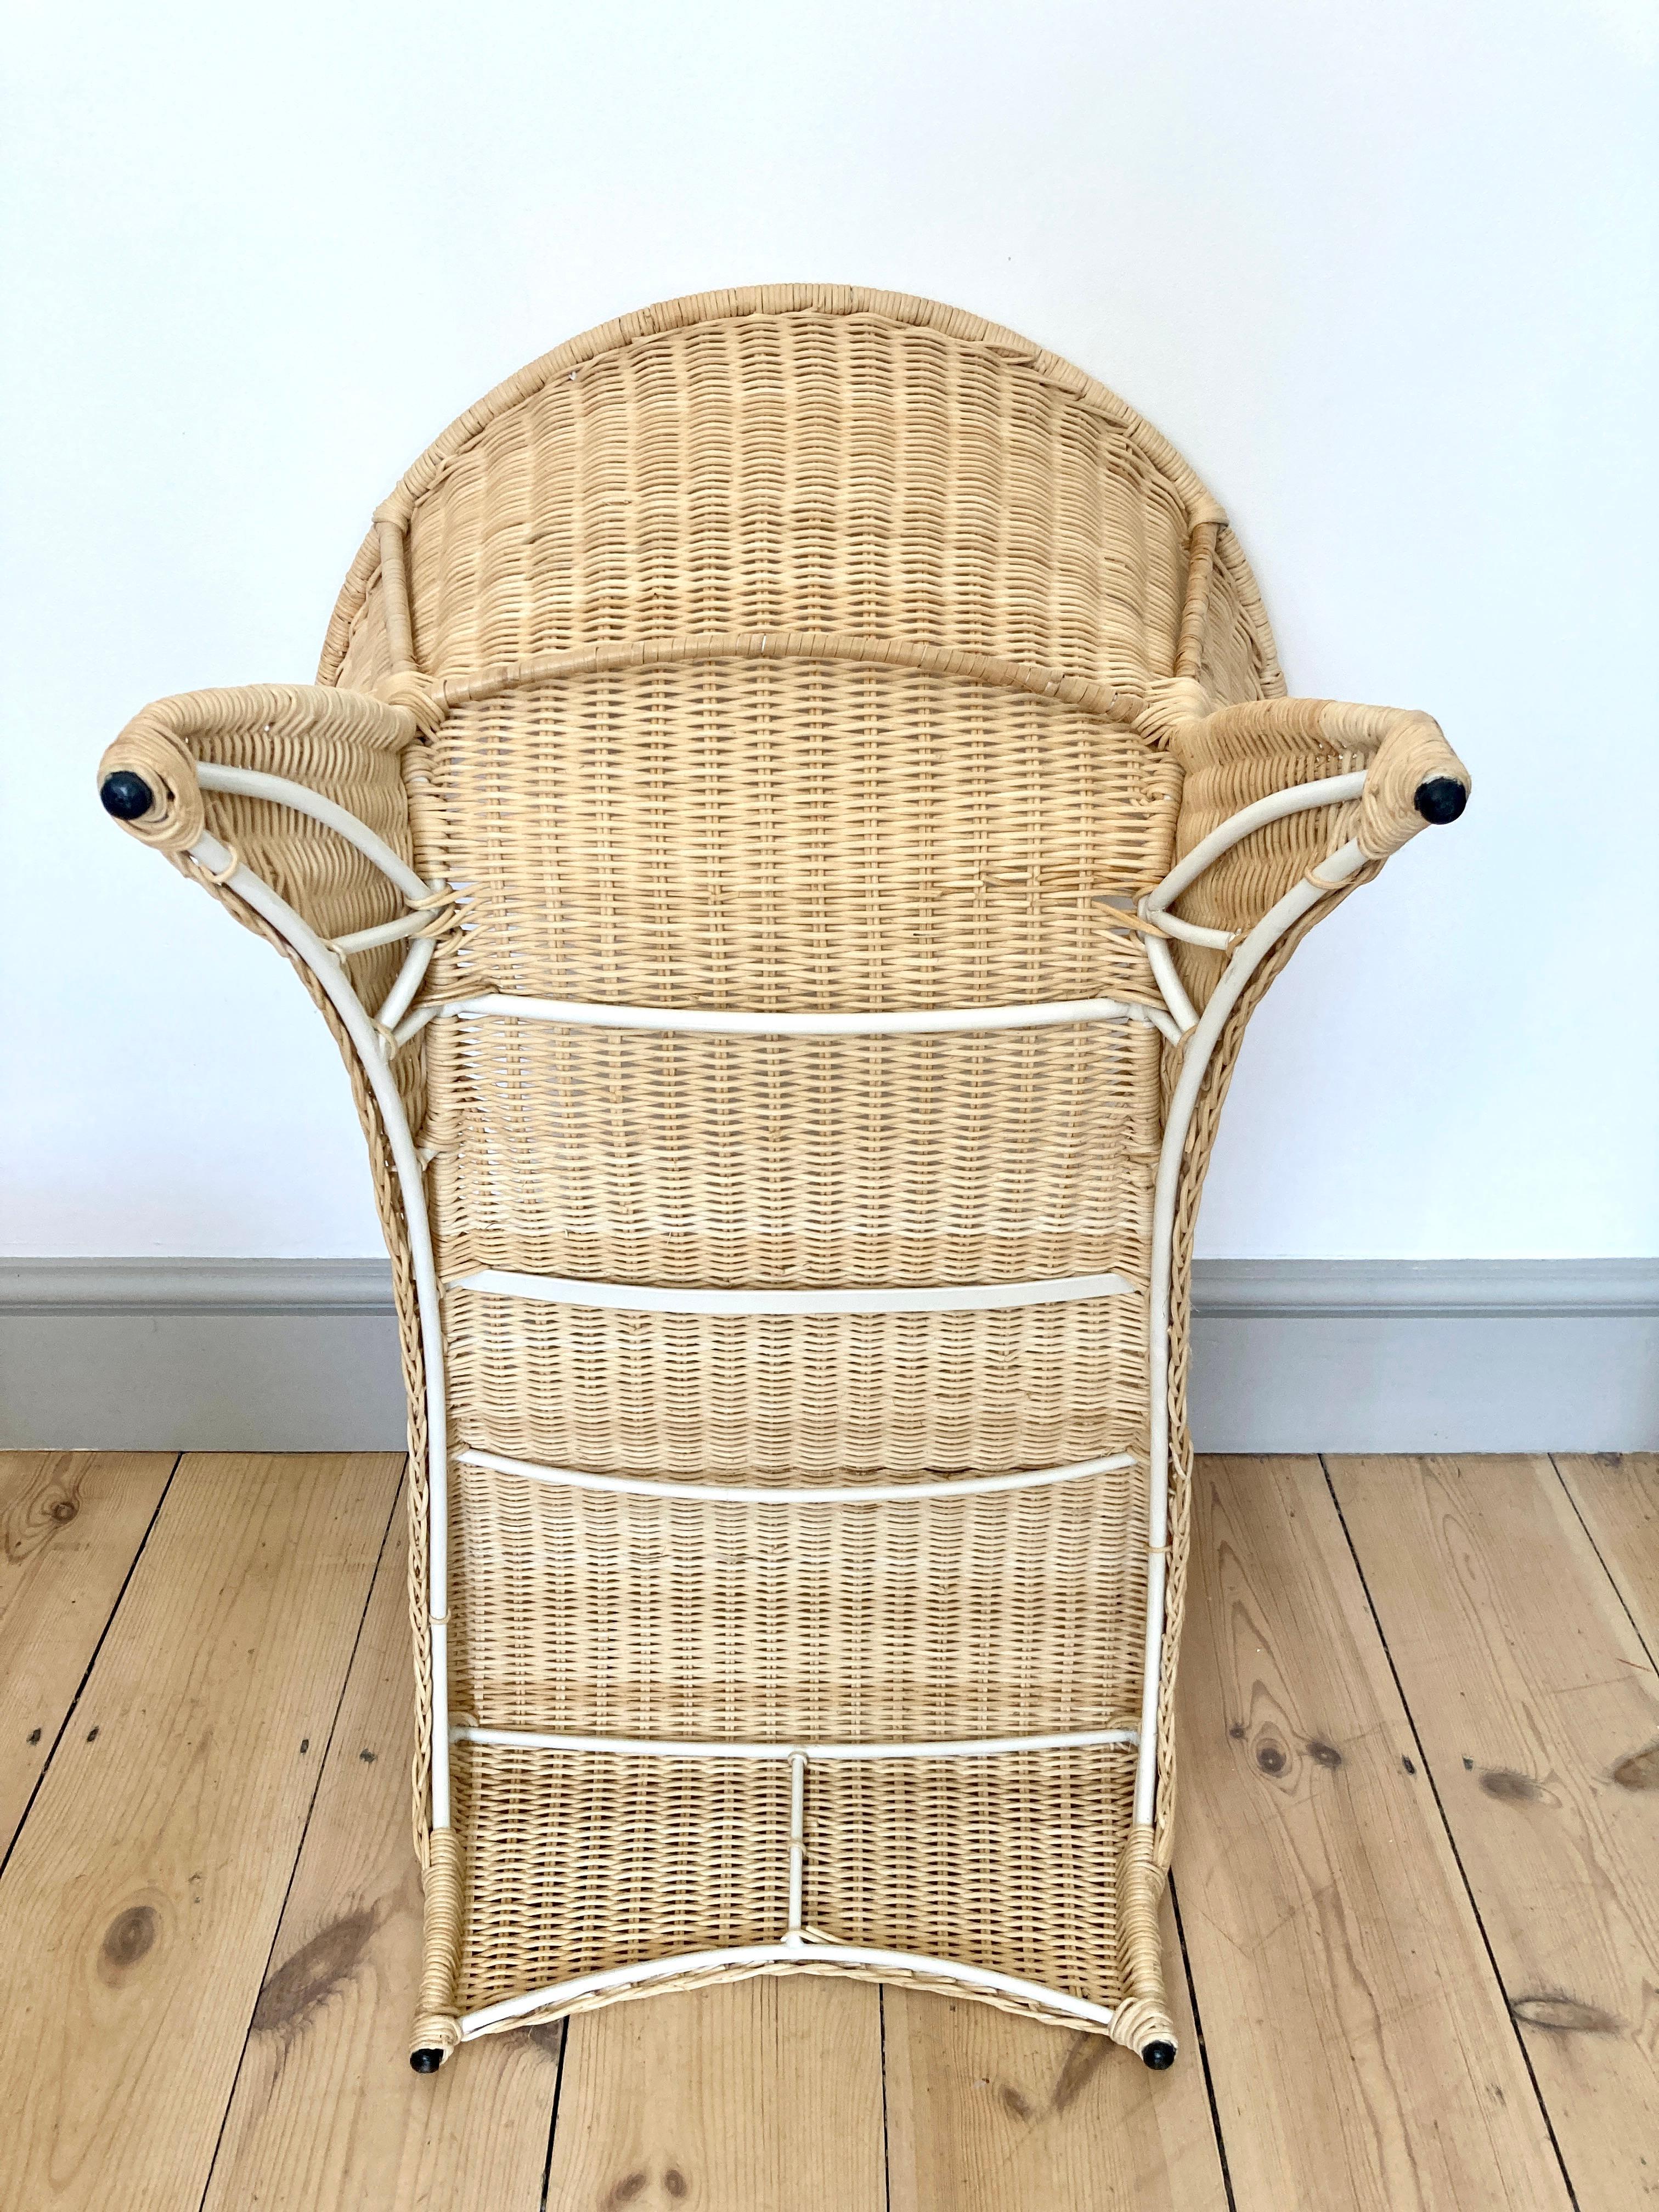 Low Lounge Chair / Chaise Longue by Monika Mulder for Ikea Savo Natural Rattan 10